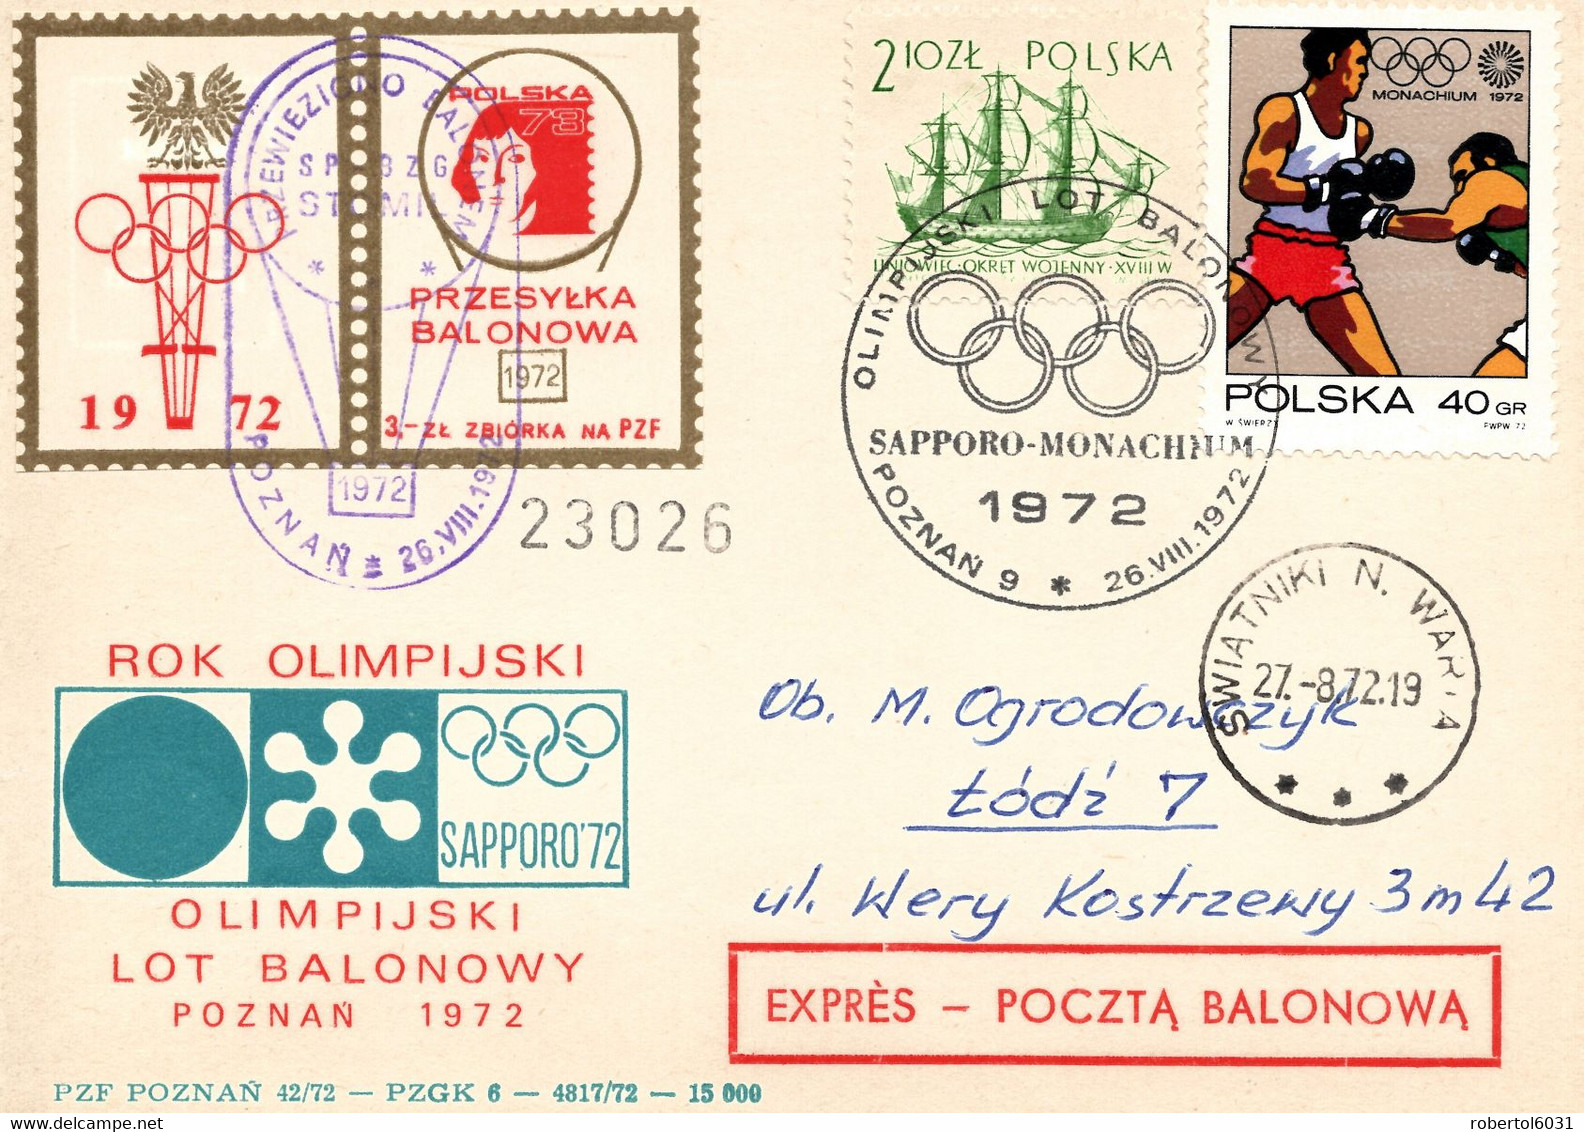 Poland 1972 Thincard Posted By Balloon Post From Poznan To Lodz With Special Cancel Olympic Games Sapporo And Munich - Ballonpost